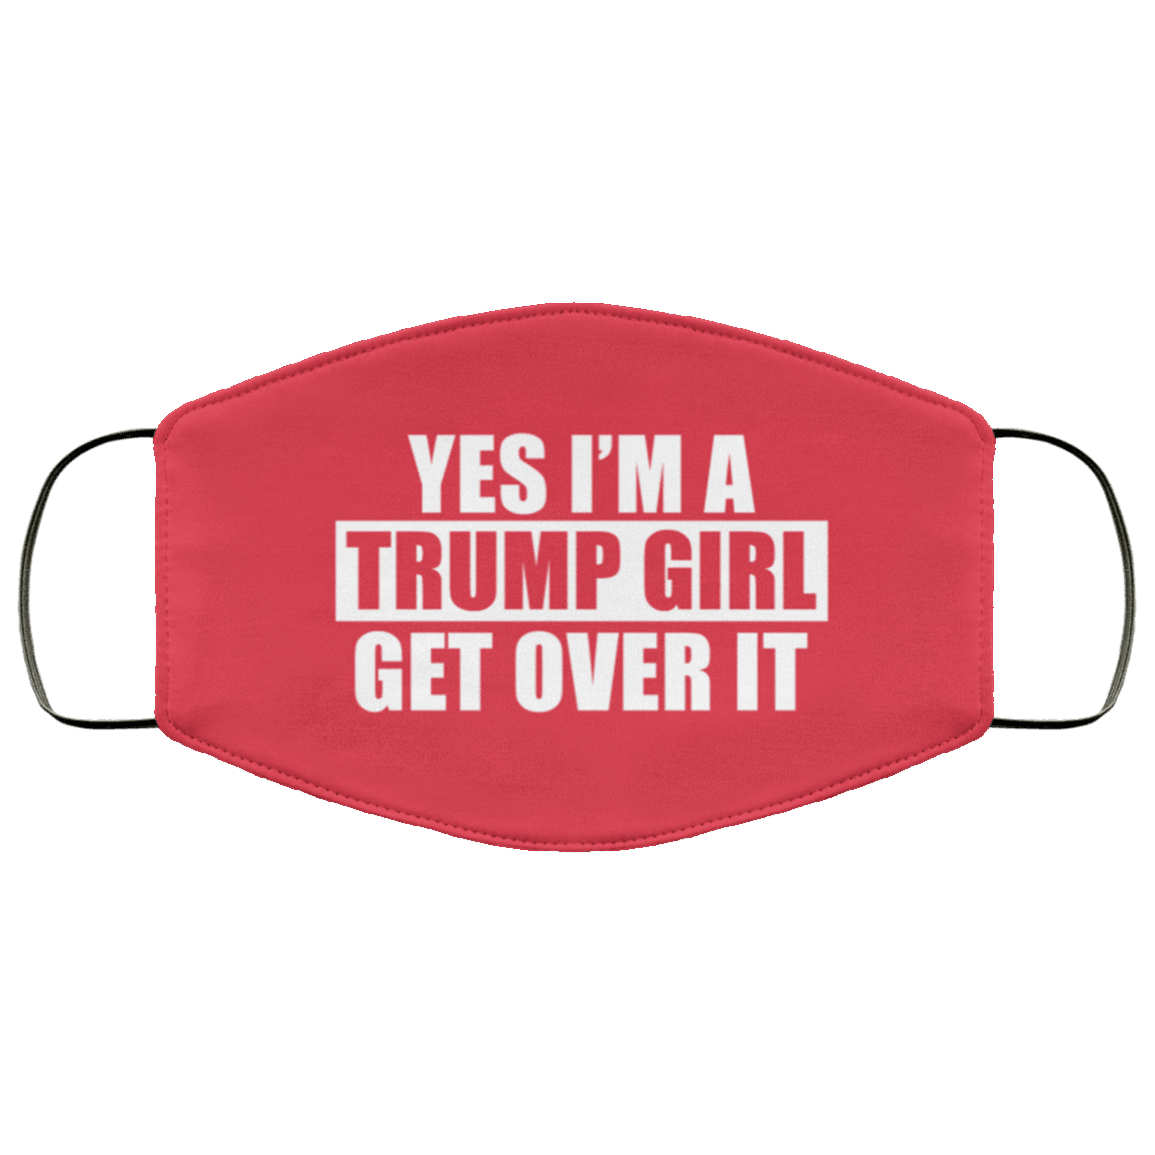 Designs by MyUtopia Shout Out:I'm A Trump Girl Get Over It Humor Adult Fabric Face Mask with Elastic Ear Loops,3 Layer Fabric Face Mask / Red / Adult,Fabric Face Mask